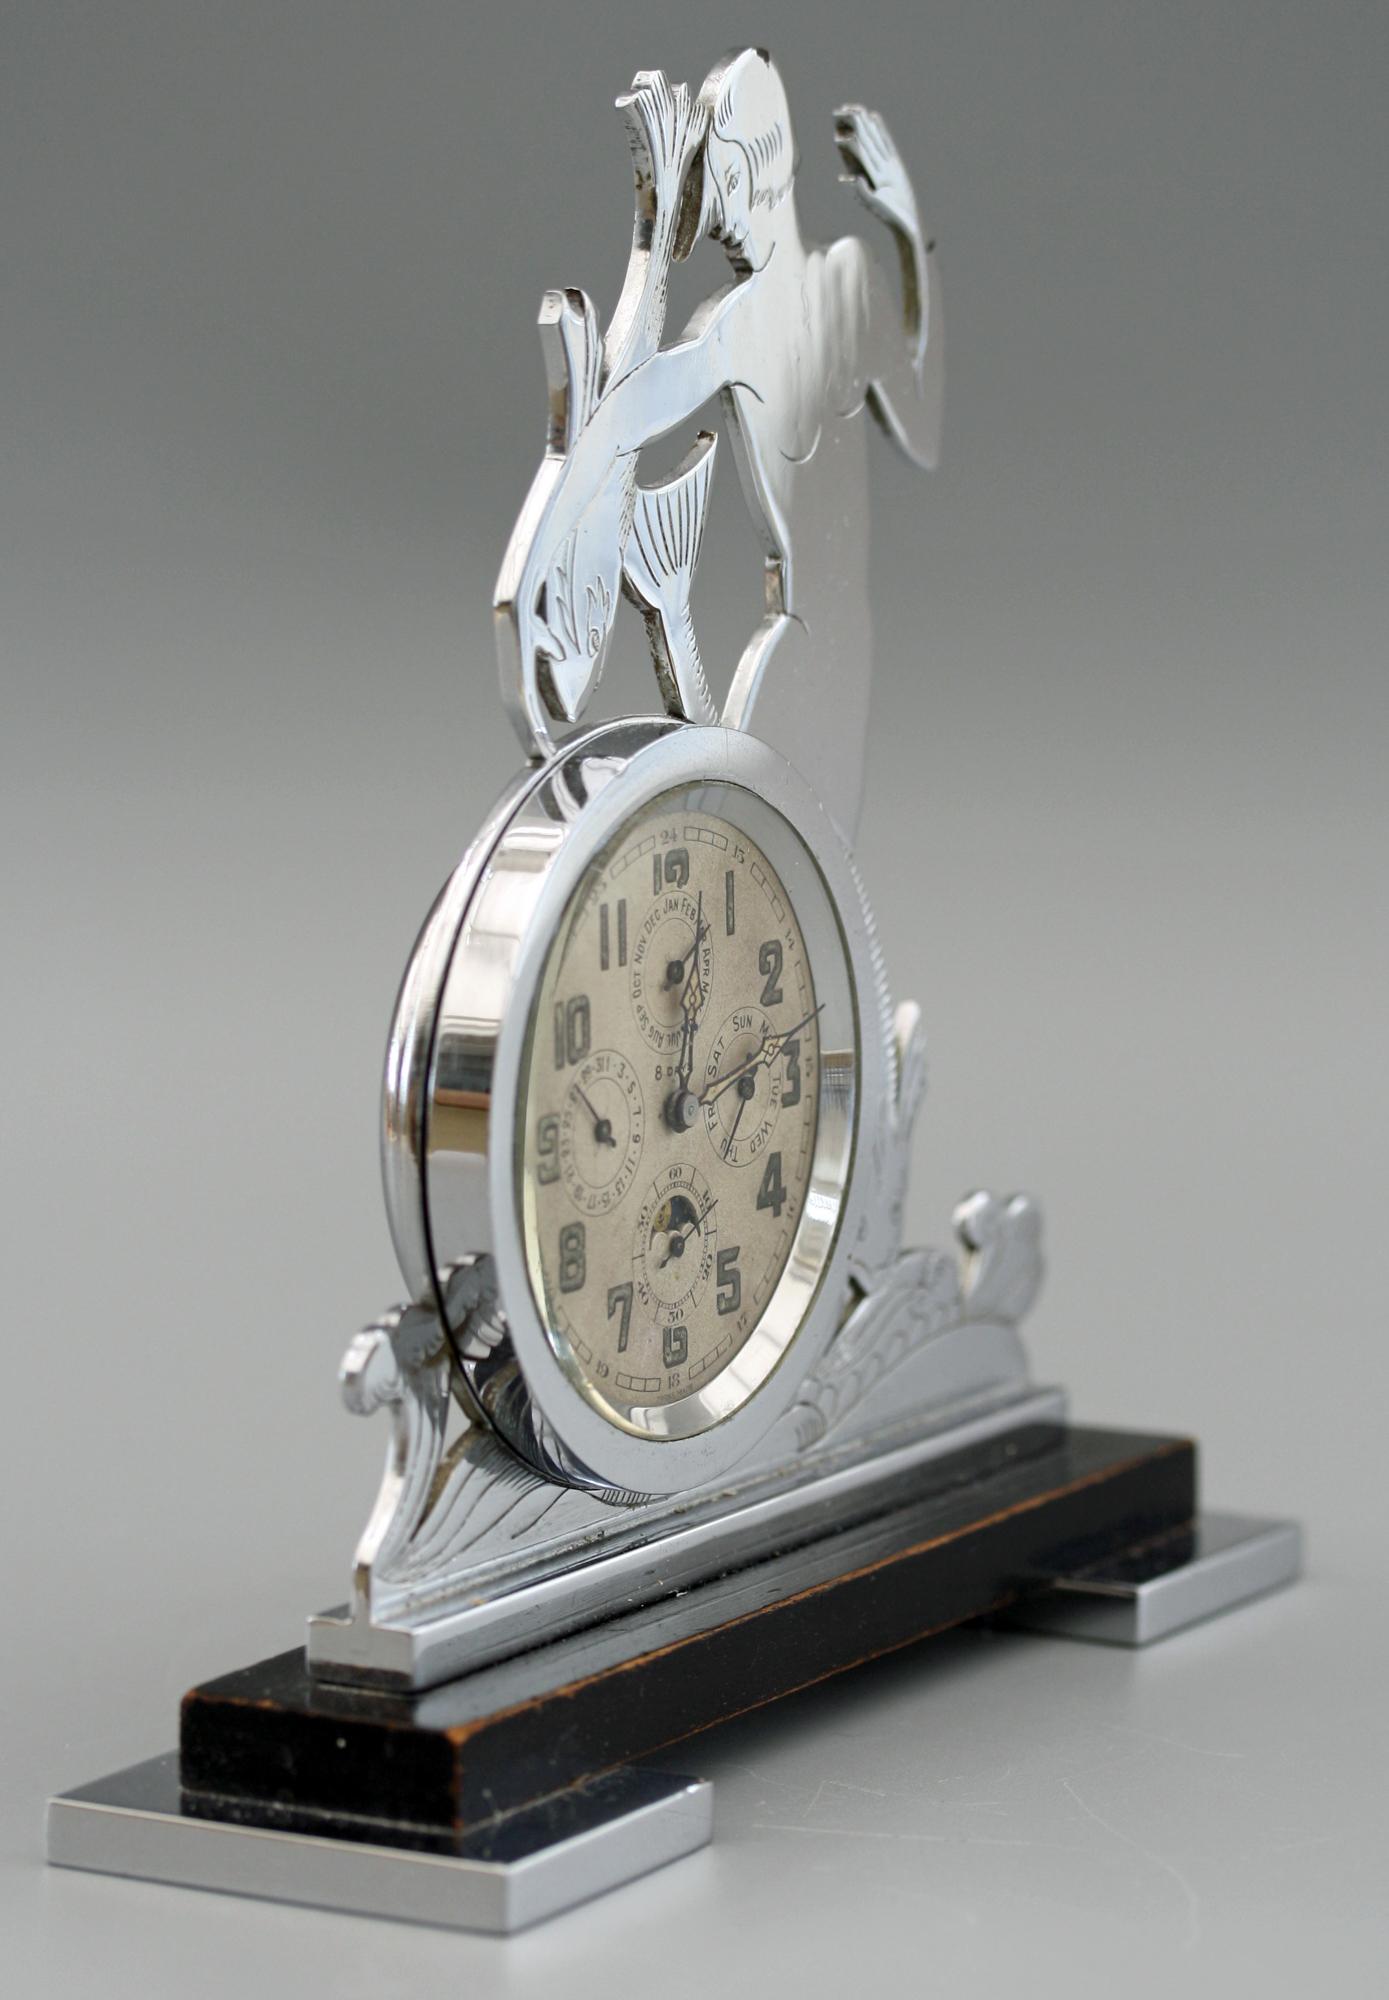 A extremely rare and very stylish Art Deco 8 day clock with four complications including moonphase dating from around 1930. The cock stands mounted on two rectangular polished chrome feet with a wooden base supporting a chrome cut out of a mermaid